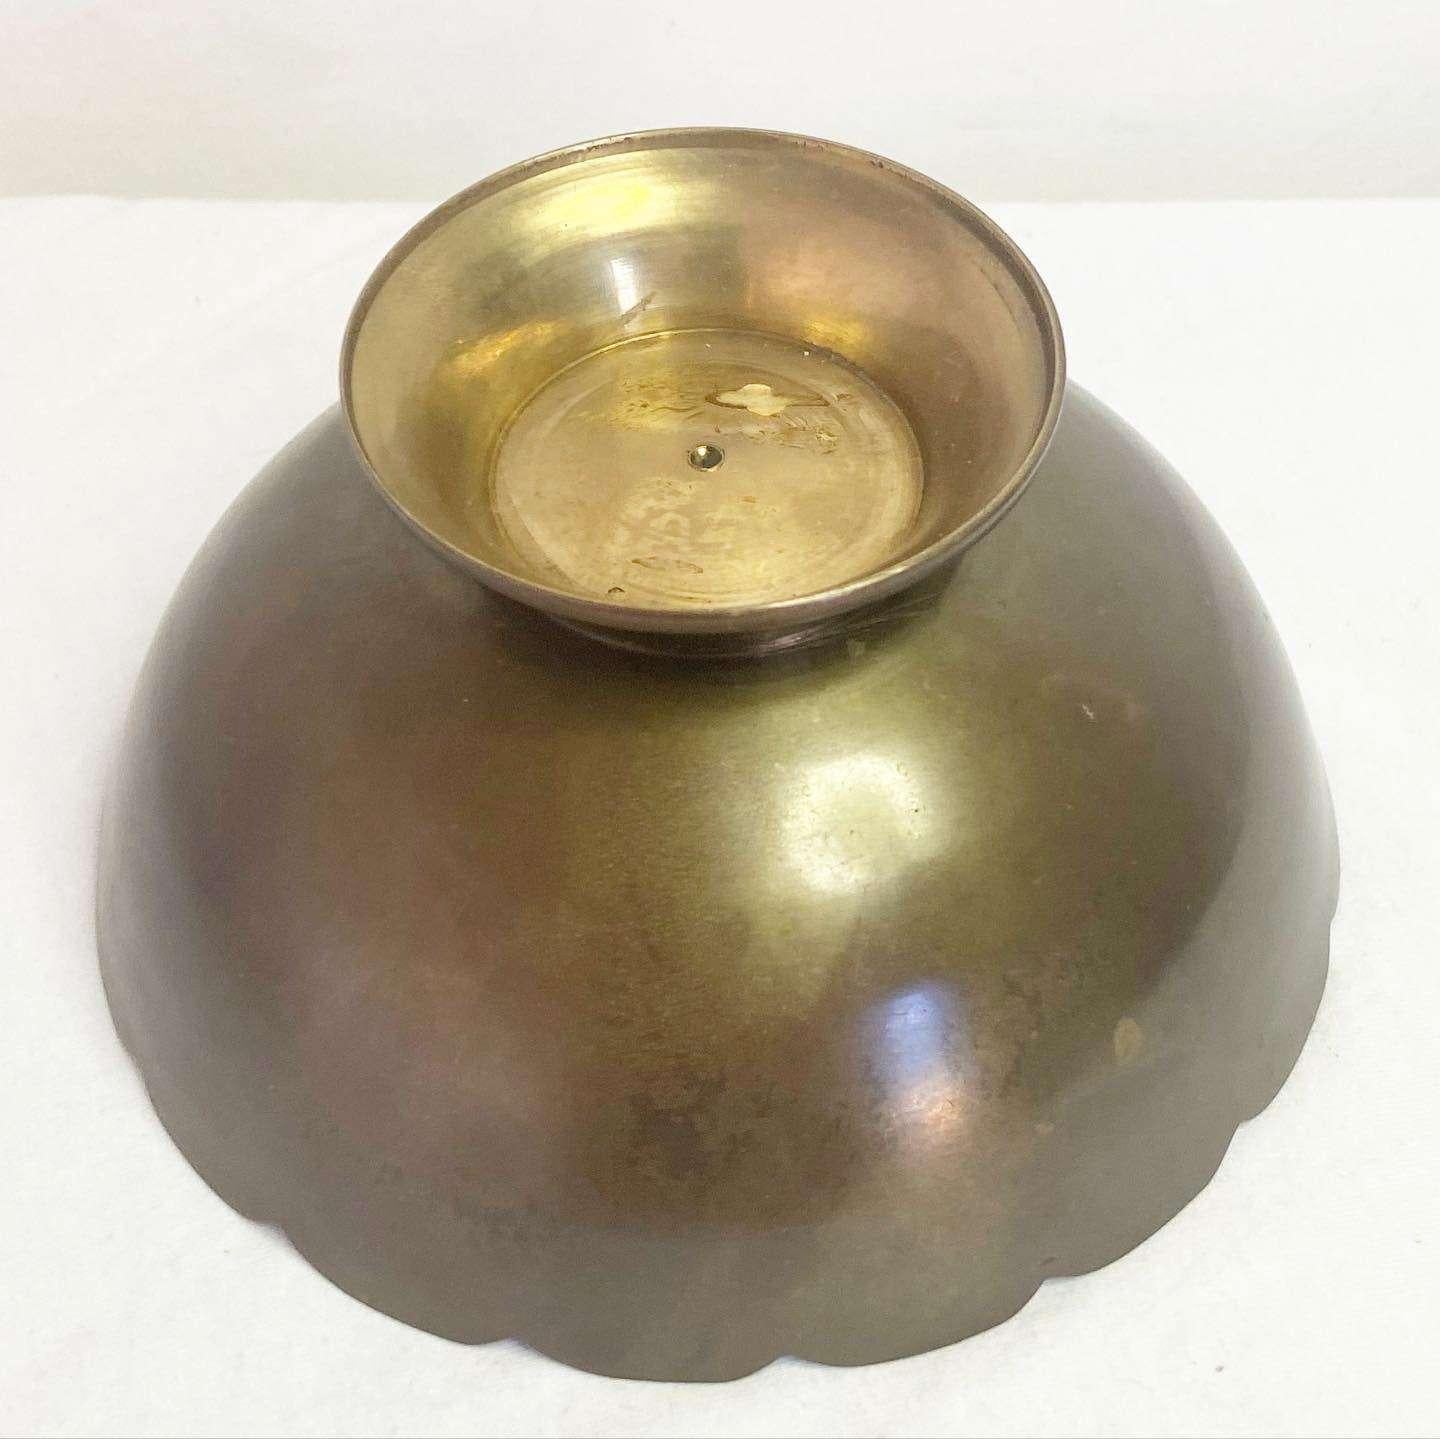 Stunning vintage brass bowl/catchall. Features a painted interior.
